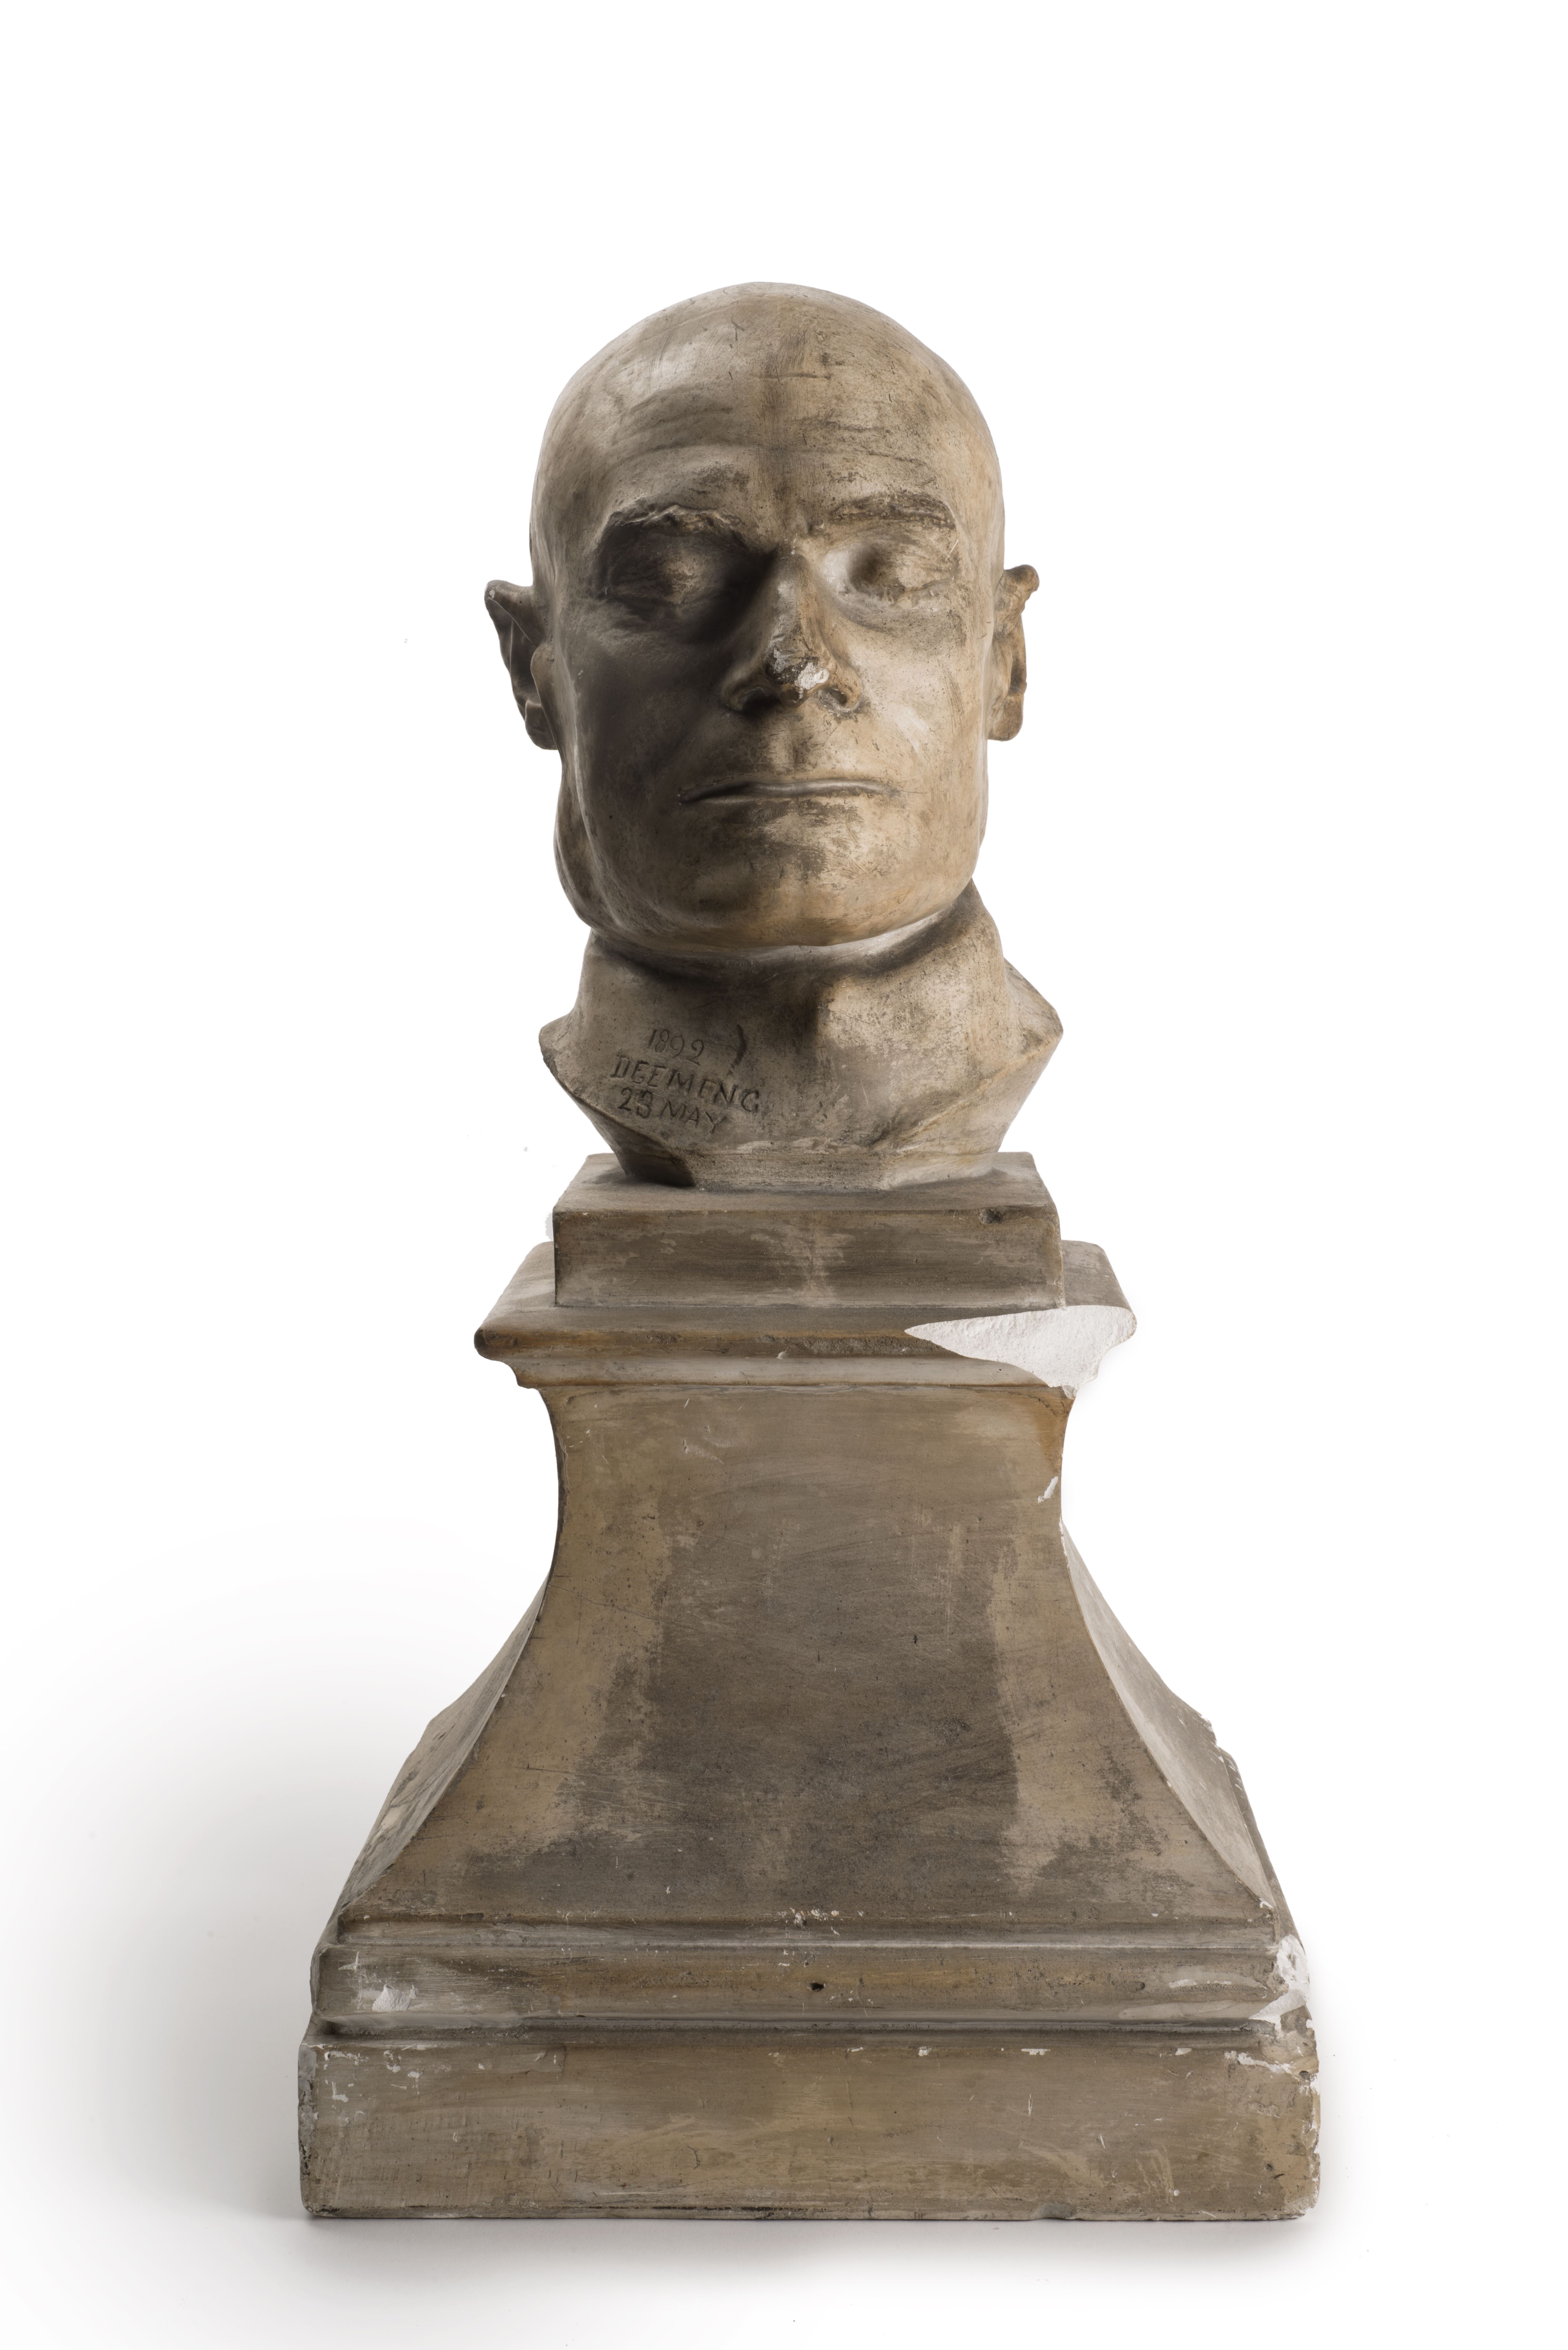 4. Death mask of murderer Frederick Deeming, a Jack the Ripper suspect , 1892 ∏ Museum of London